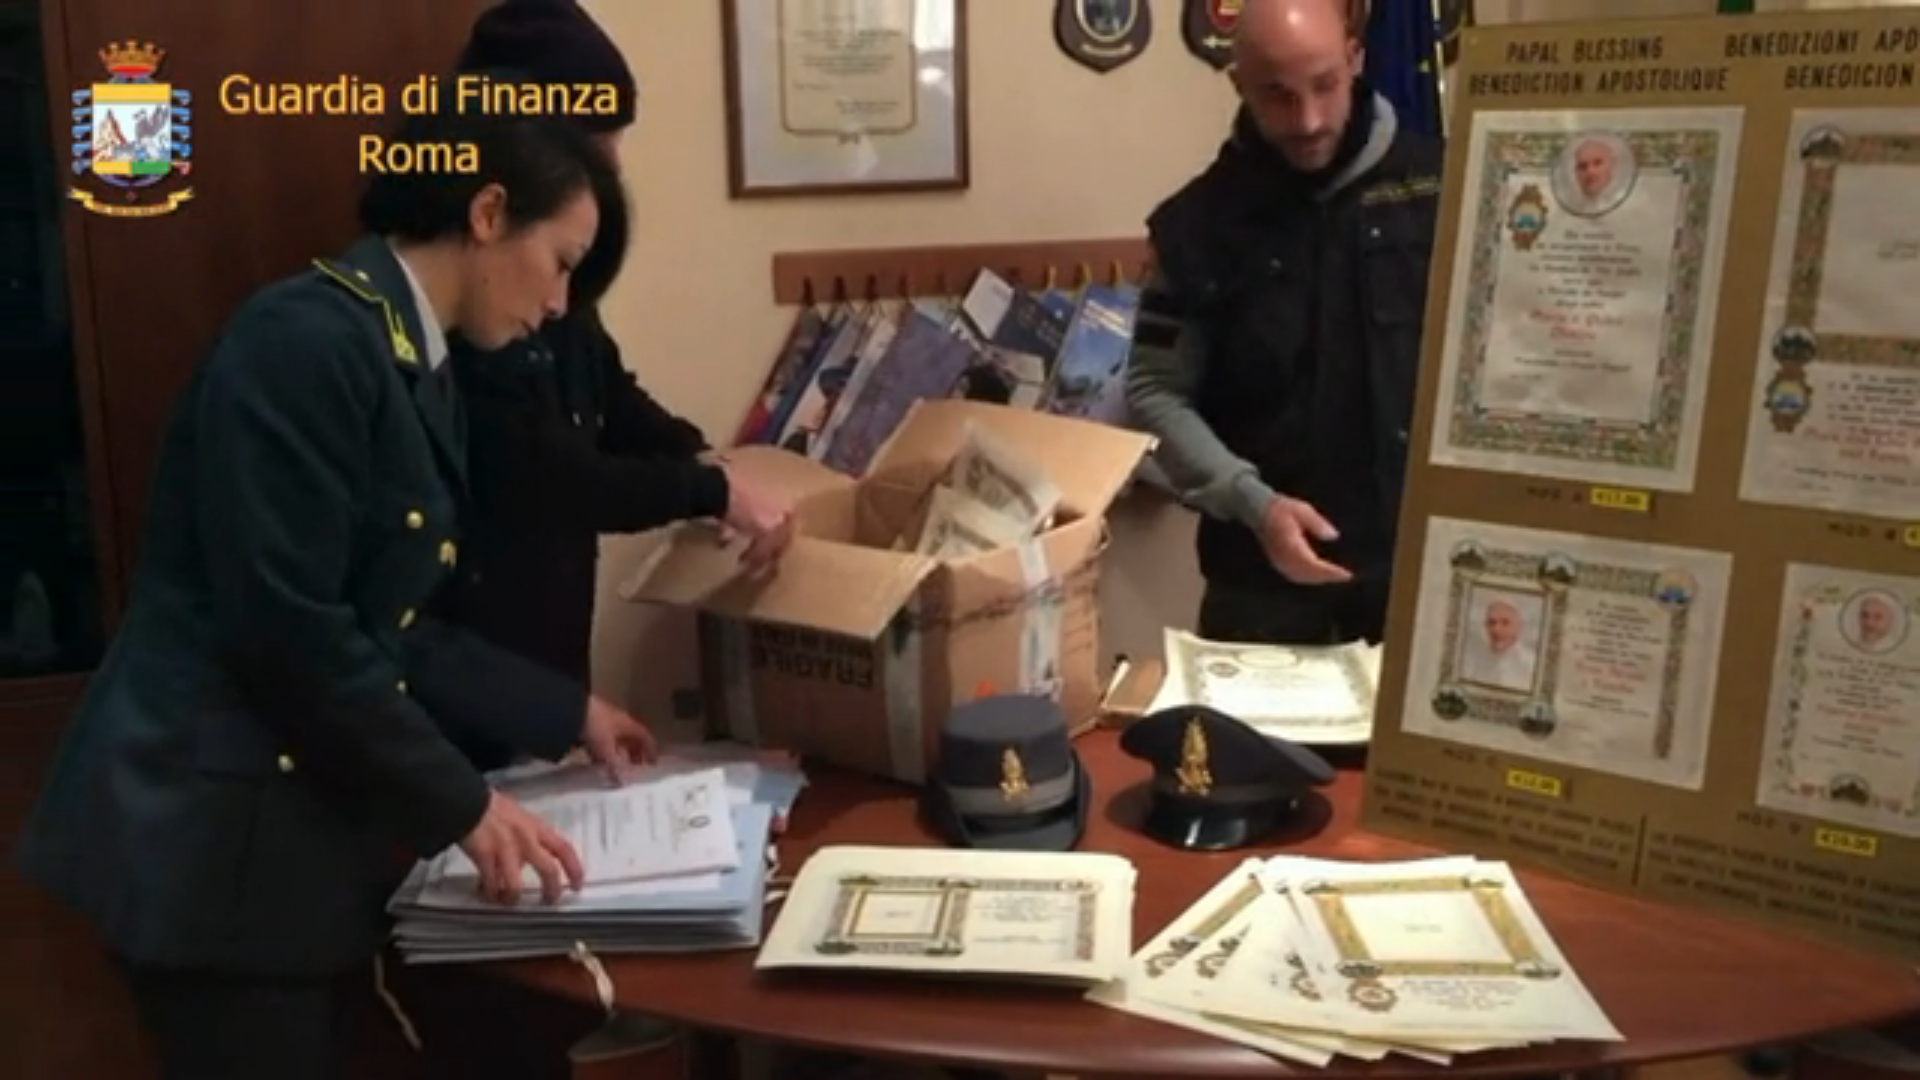 False papal benedictions seized by Financial Police in Rome